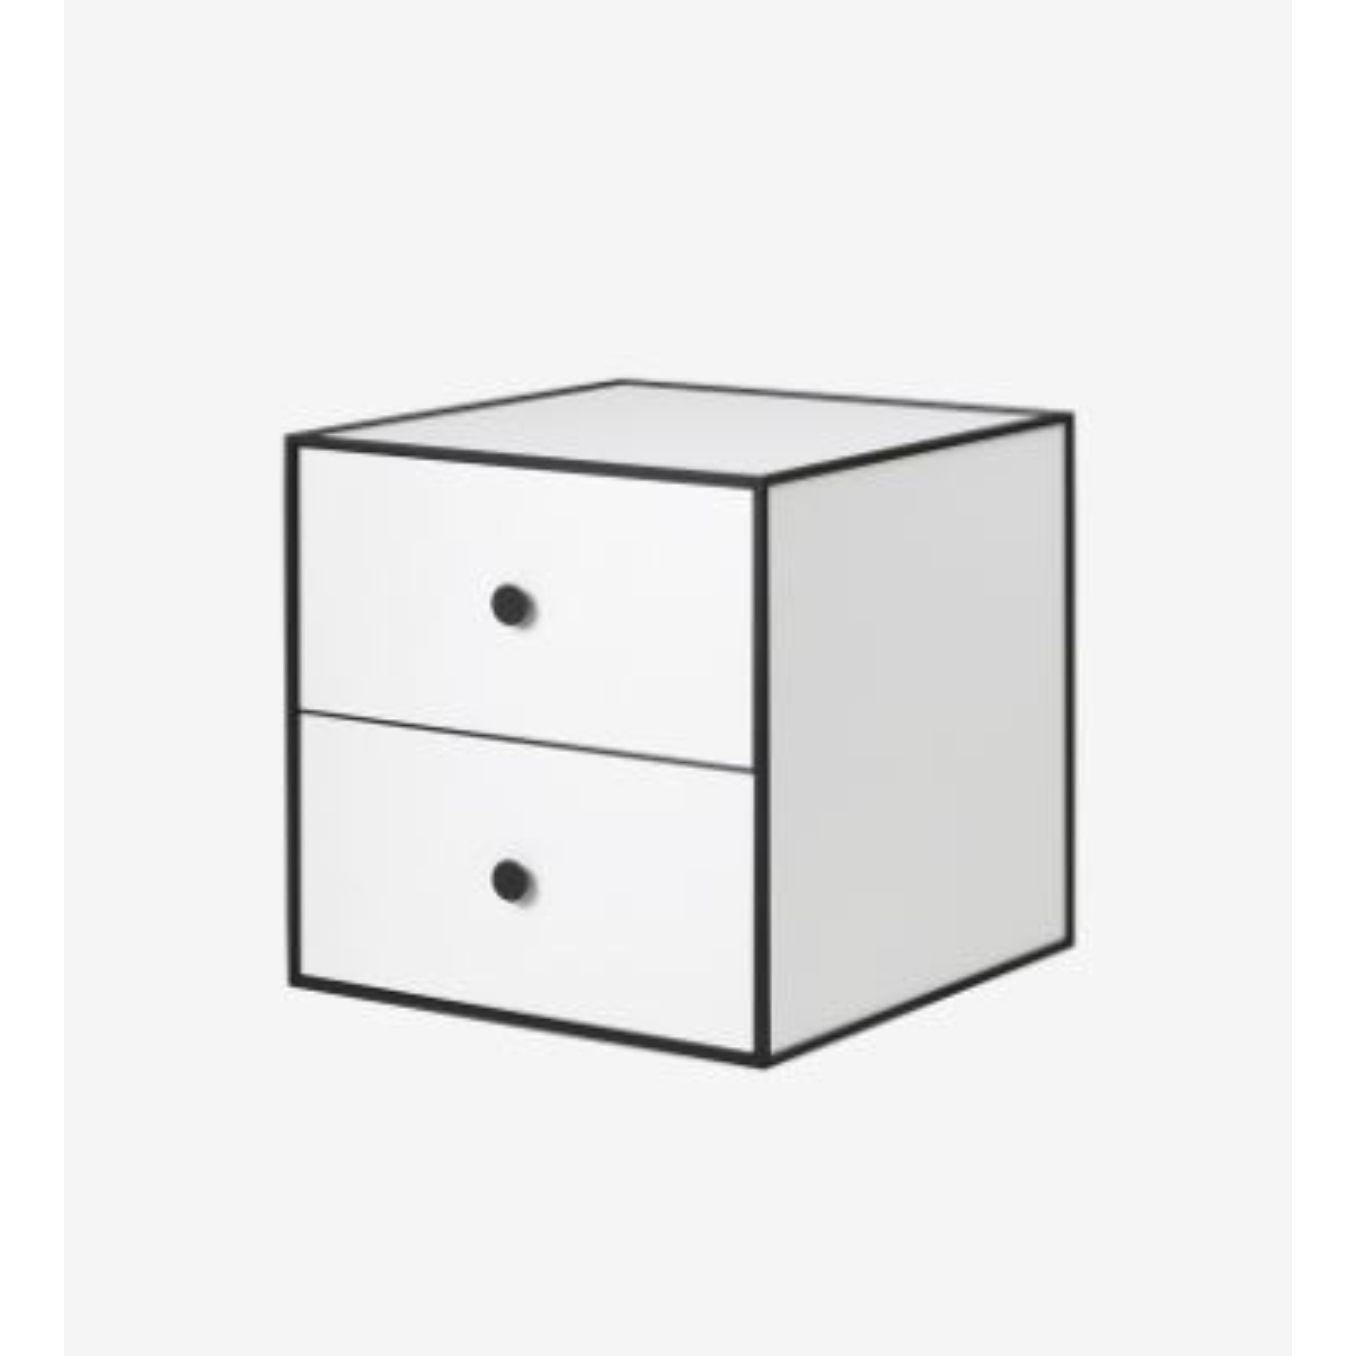 35 White frame box with 2 drawer by Lassen.
Dimensions: W 35 x D 35 x H 35 cm.
Materials: Finér, Melamin, Melamin, Melamine, Metal, Veneer
Also available in different colors and dimensions. 
Weight: 10.50, 10.50, 11.50, 11.50 Kg

Frame